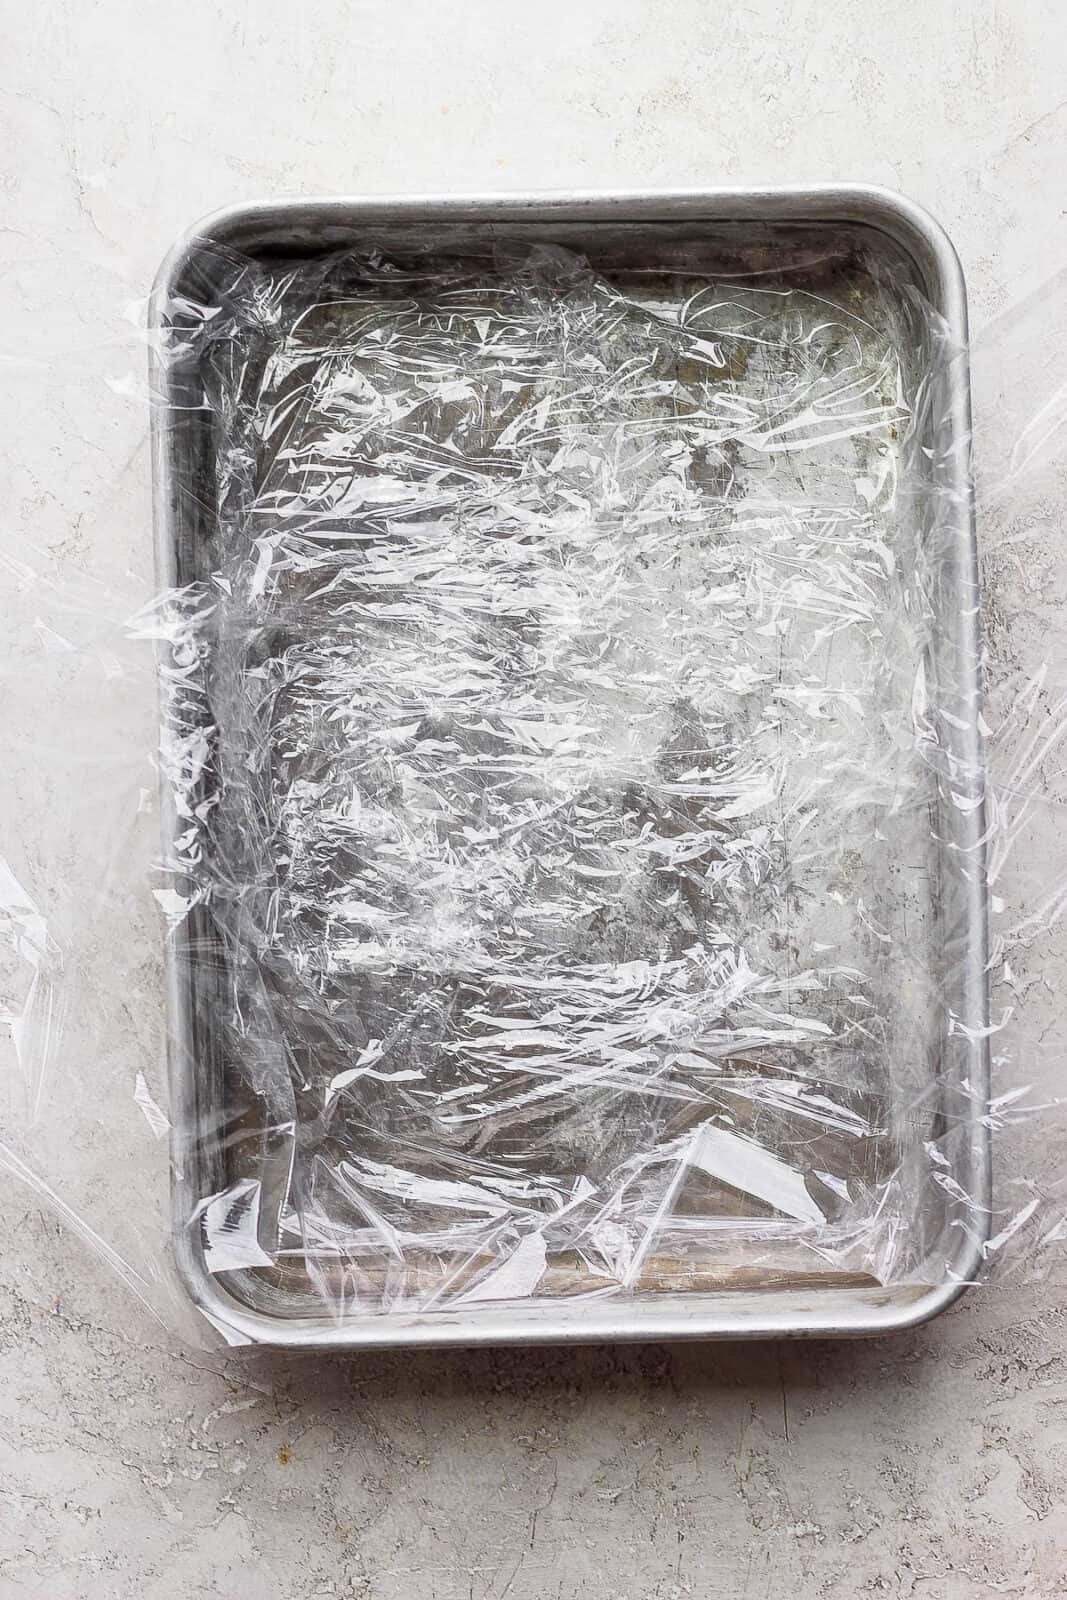 A large baking dish with plastic wrap across it. 